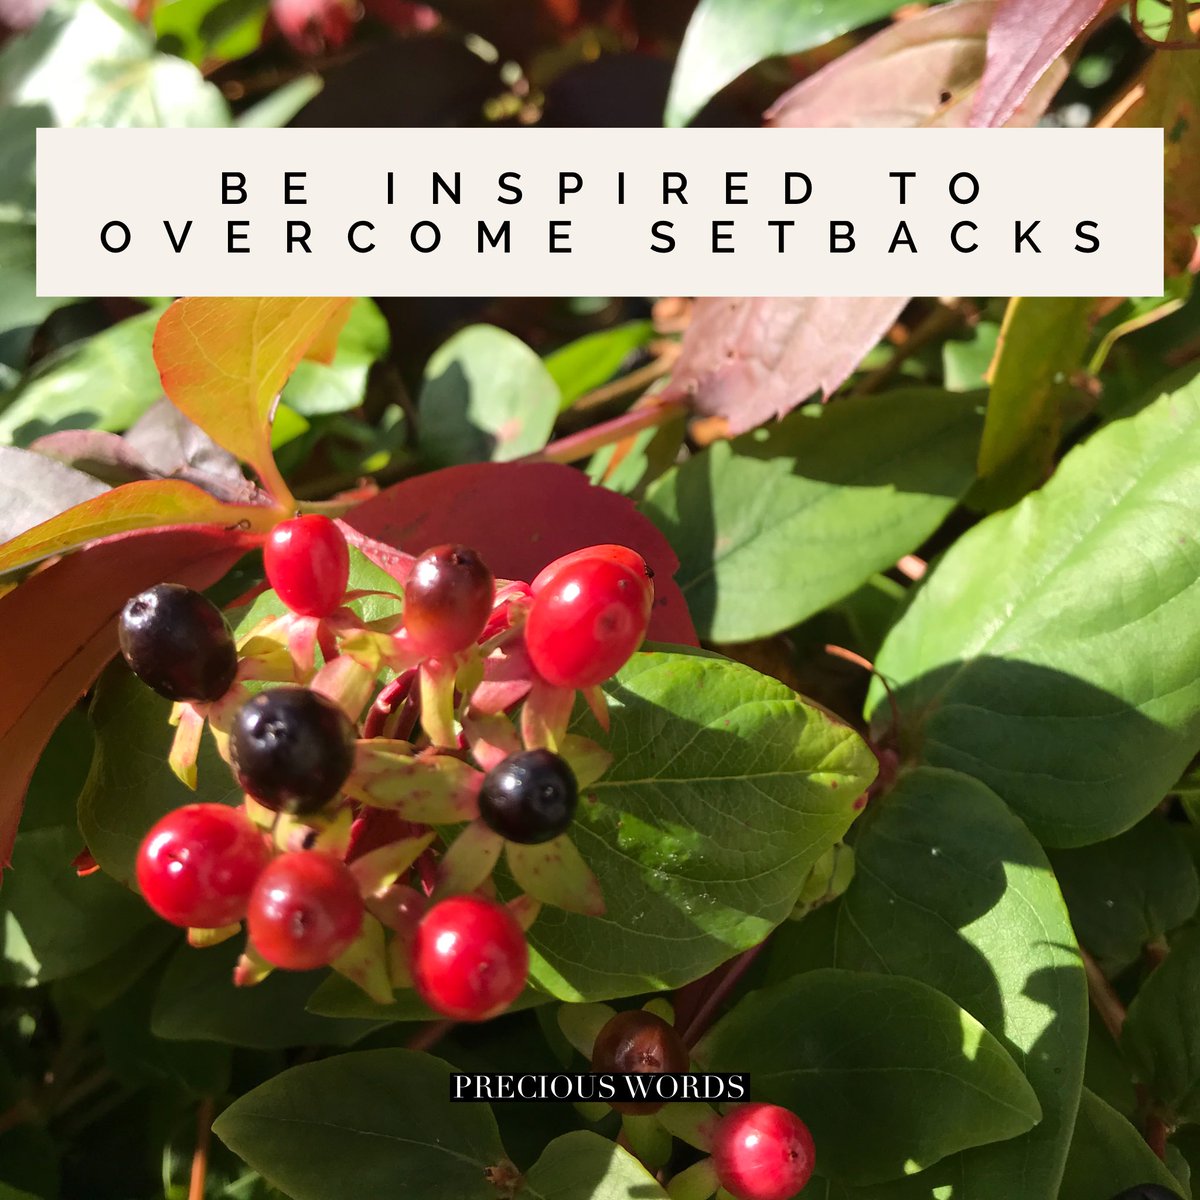 Be inspired to overcome setbacks, be strong and positive and stay strong.
#inspire #inspiredaily #beinspired #overcome #overcomesetbacks #staypositive #staystrong #preciousworedtoliveby